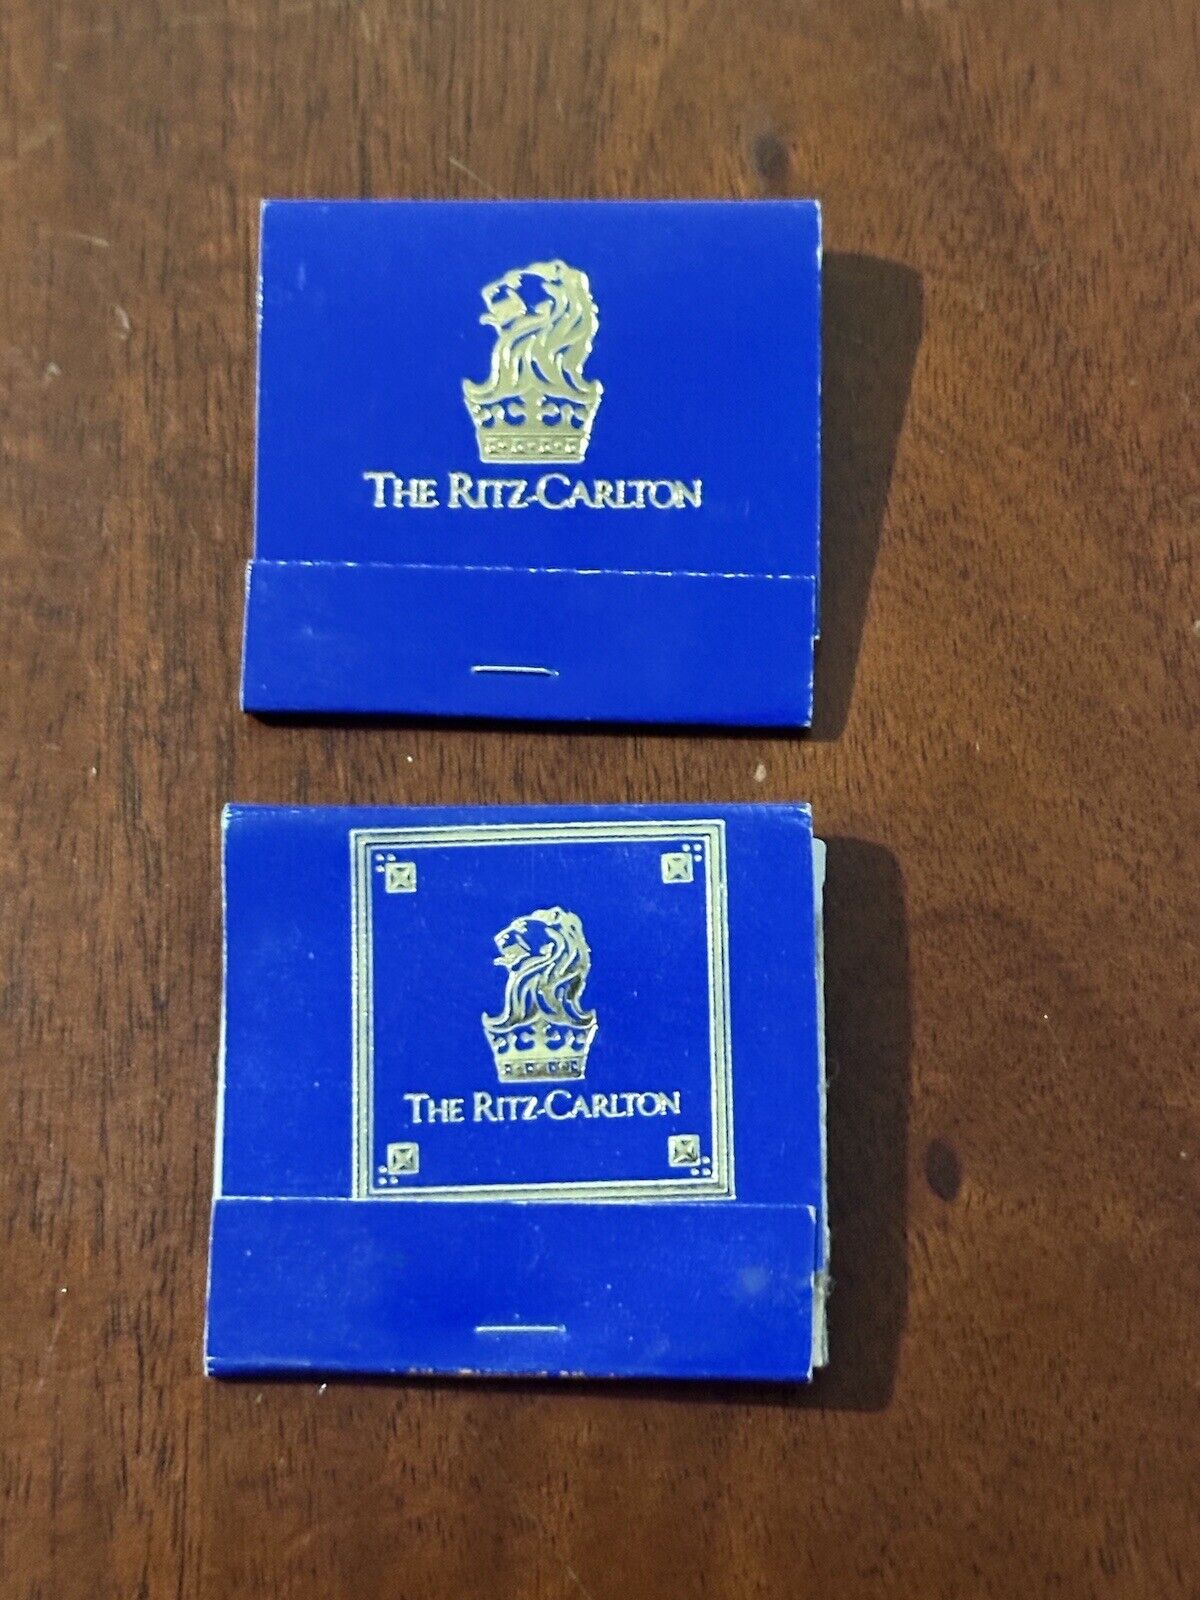 Vintage Matchbook Lot of 2 The Ritz Carlton Hotels Matches Blue *FLAW SEE PHOTOS